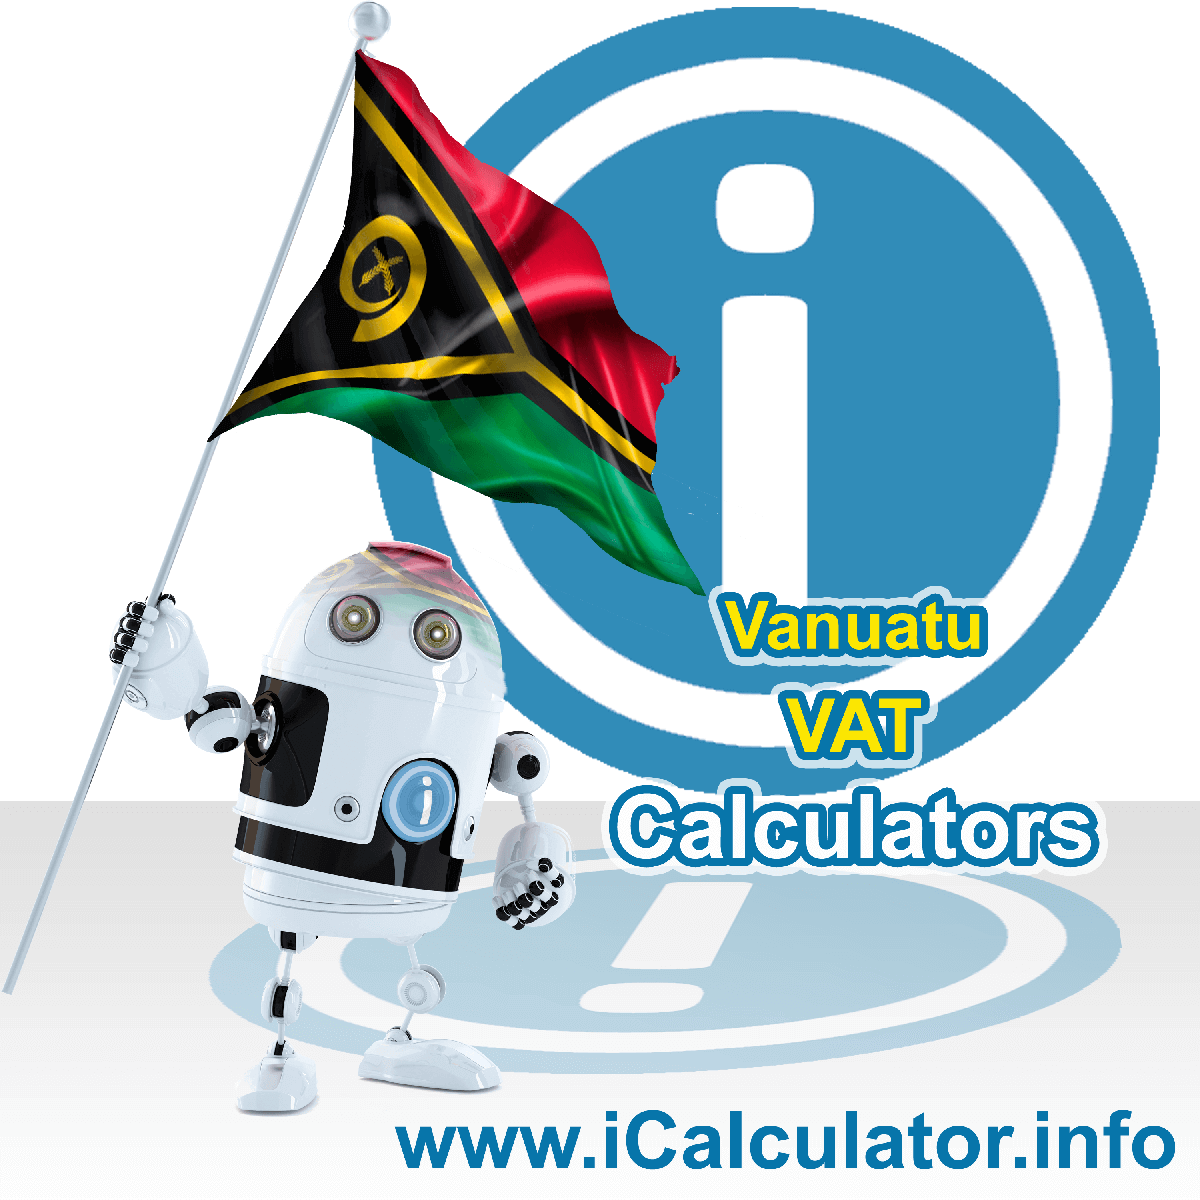 Vanuatu VAT Calculator. This image shows the Vanuatu flag and information relating to the VAT formula used for calculating Value Added Tax in Vanuatu using the Vanuatu VAT Calculator in 2023